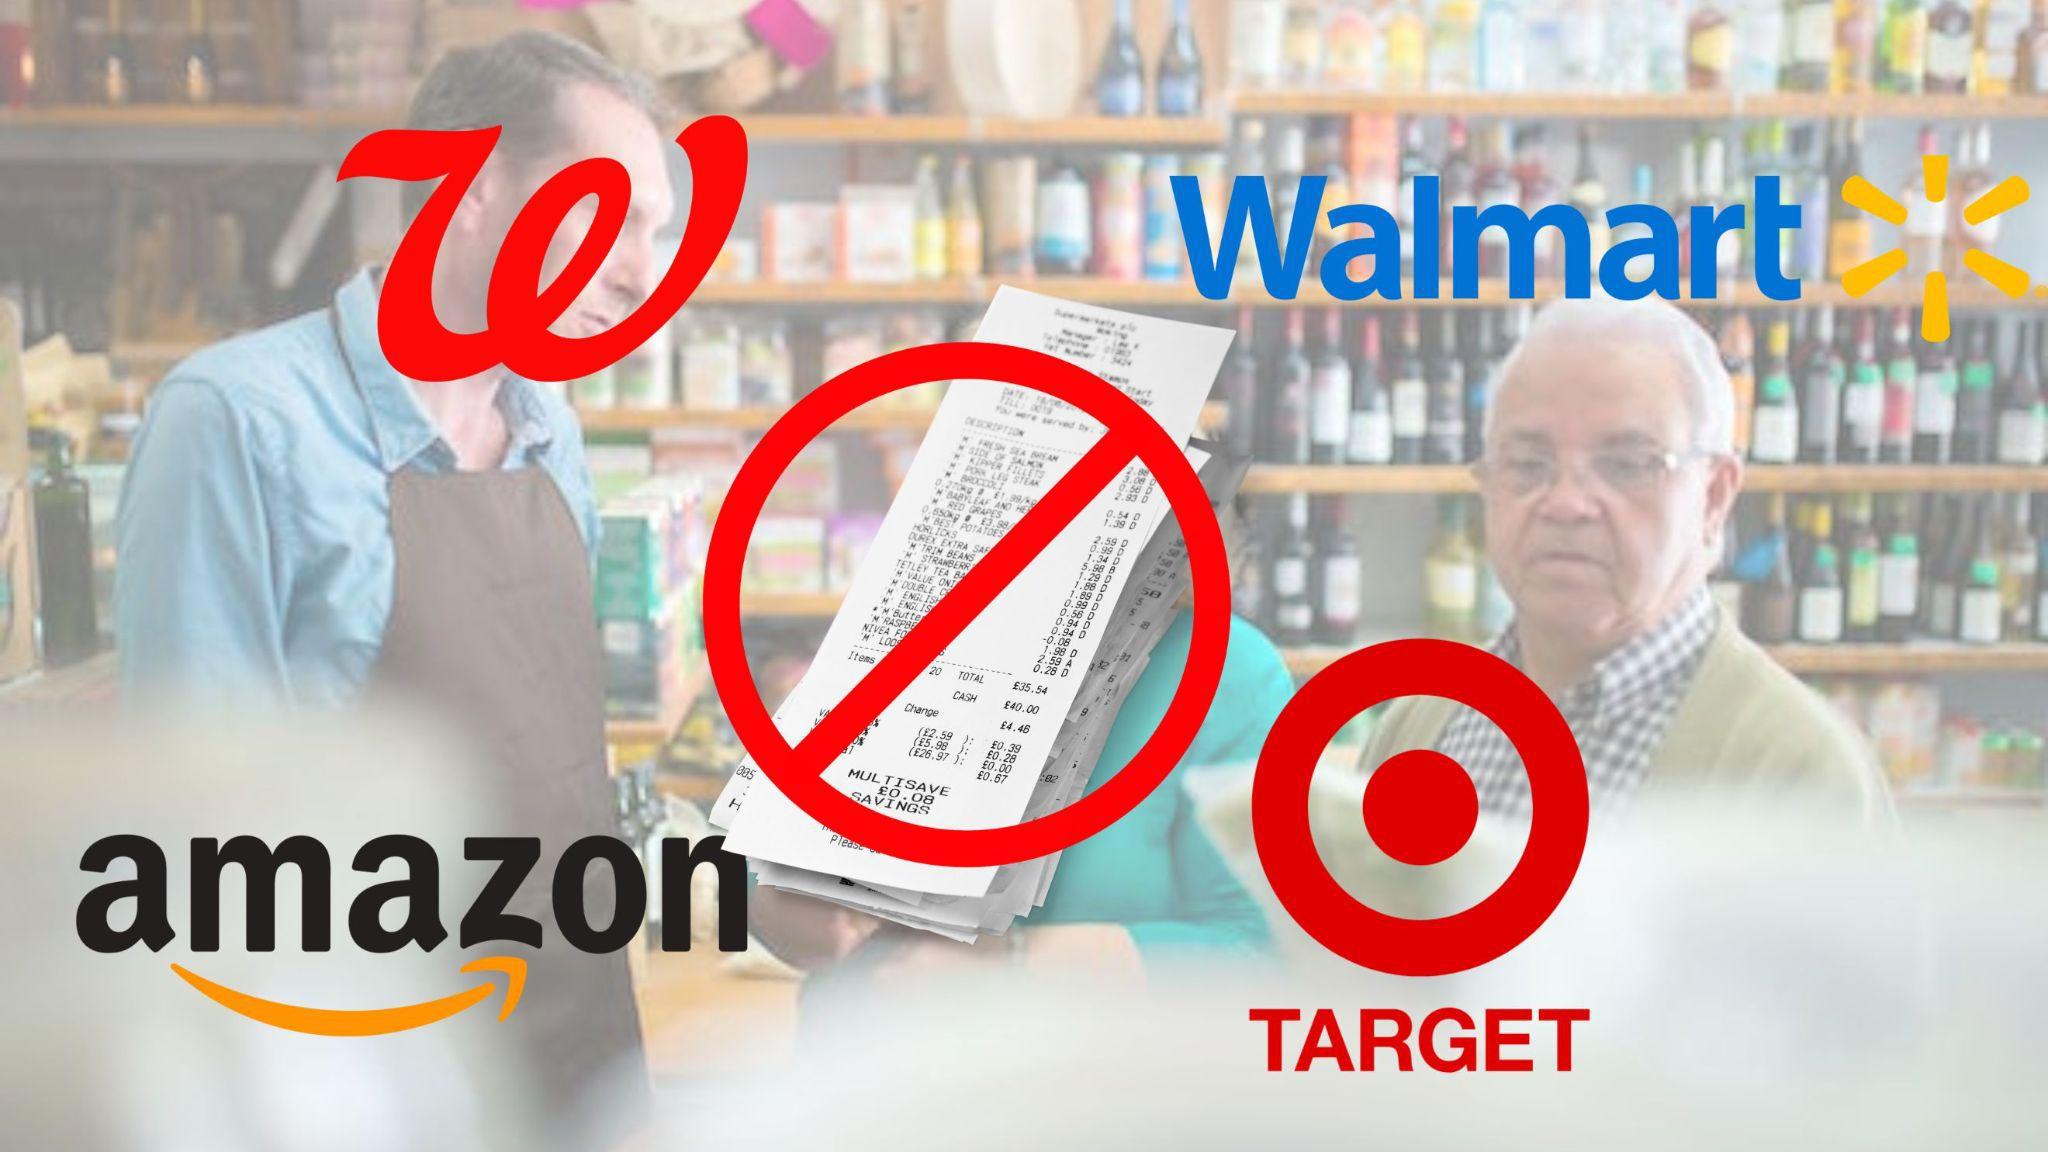 Target, Walgreens, Walmart, and Amazon logos are shown against a background of a customer return. A receipt is overlaying that, with a red “no” sign over it.